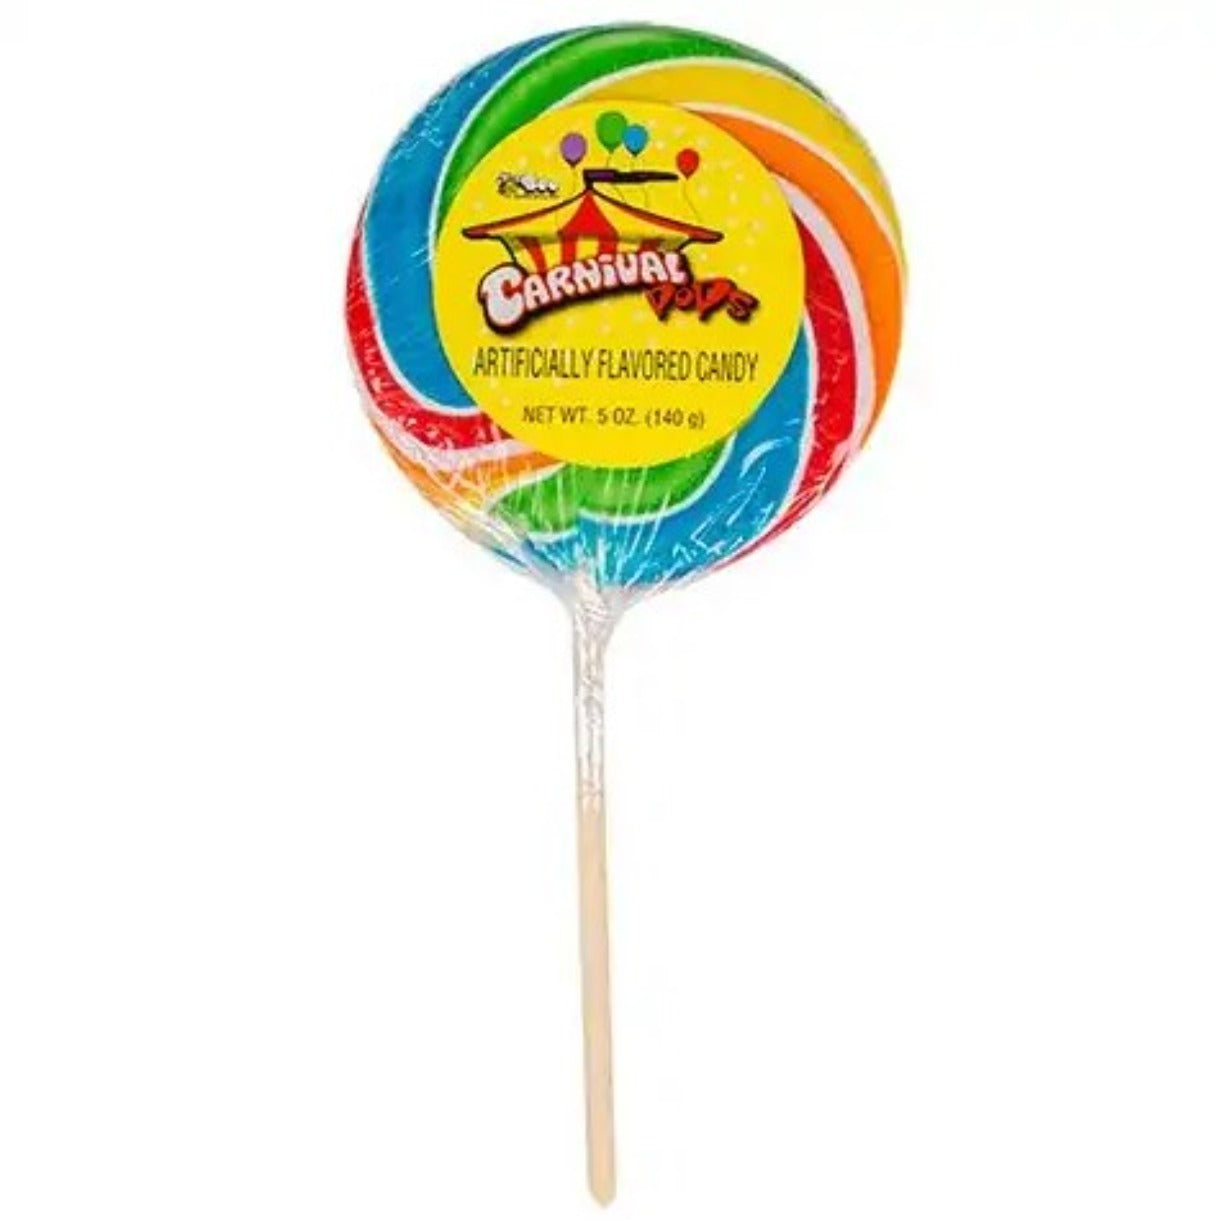 Bee Confections Giant Carnival Swirl Lollipops 4.25oz - 12ct